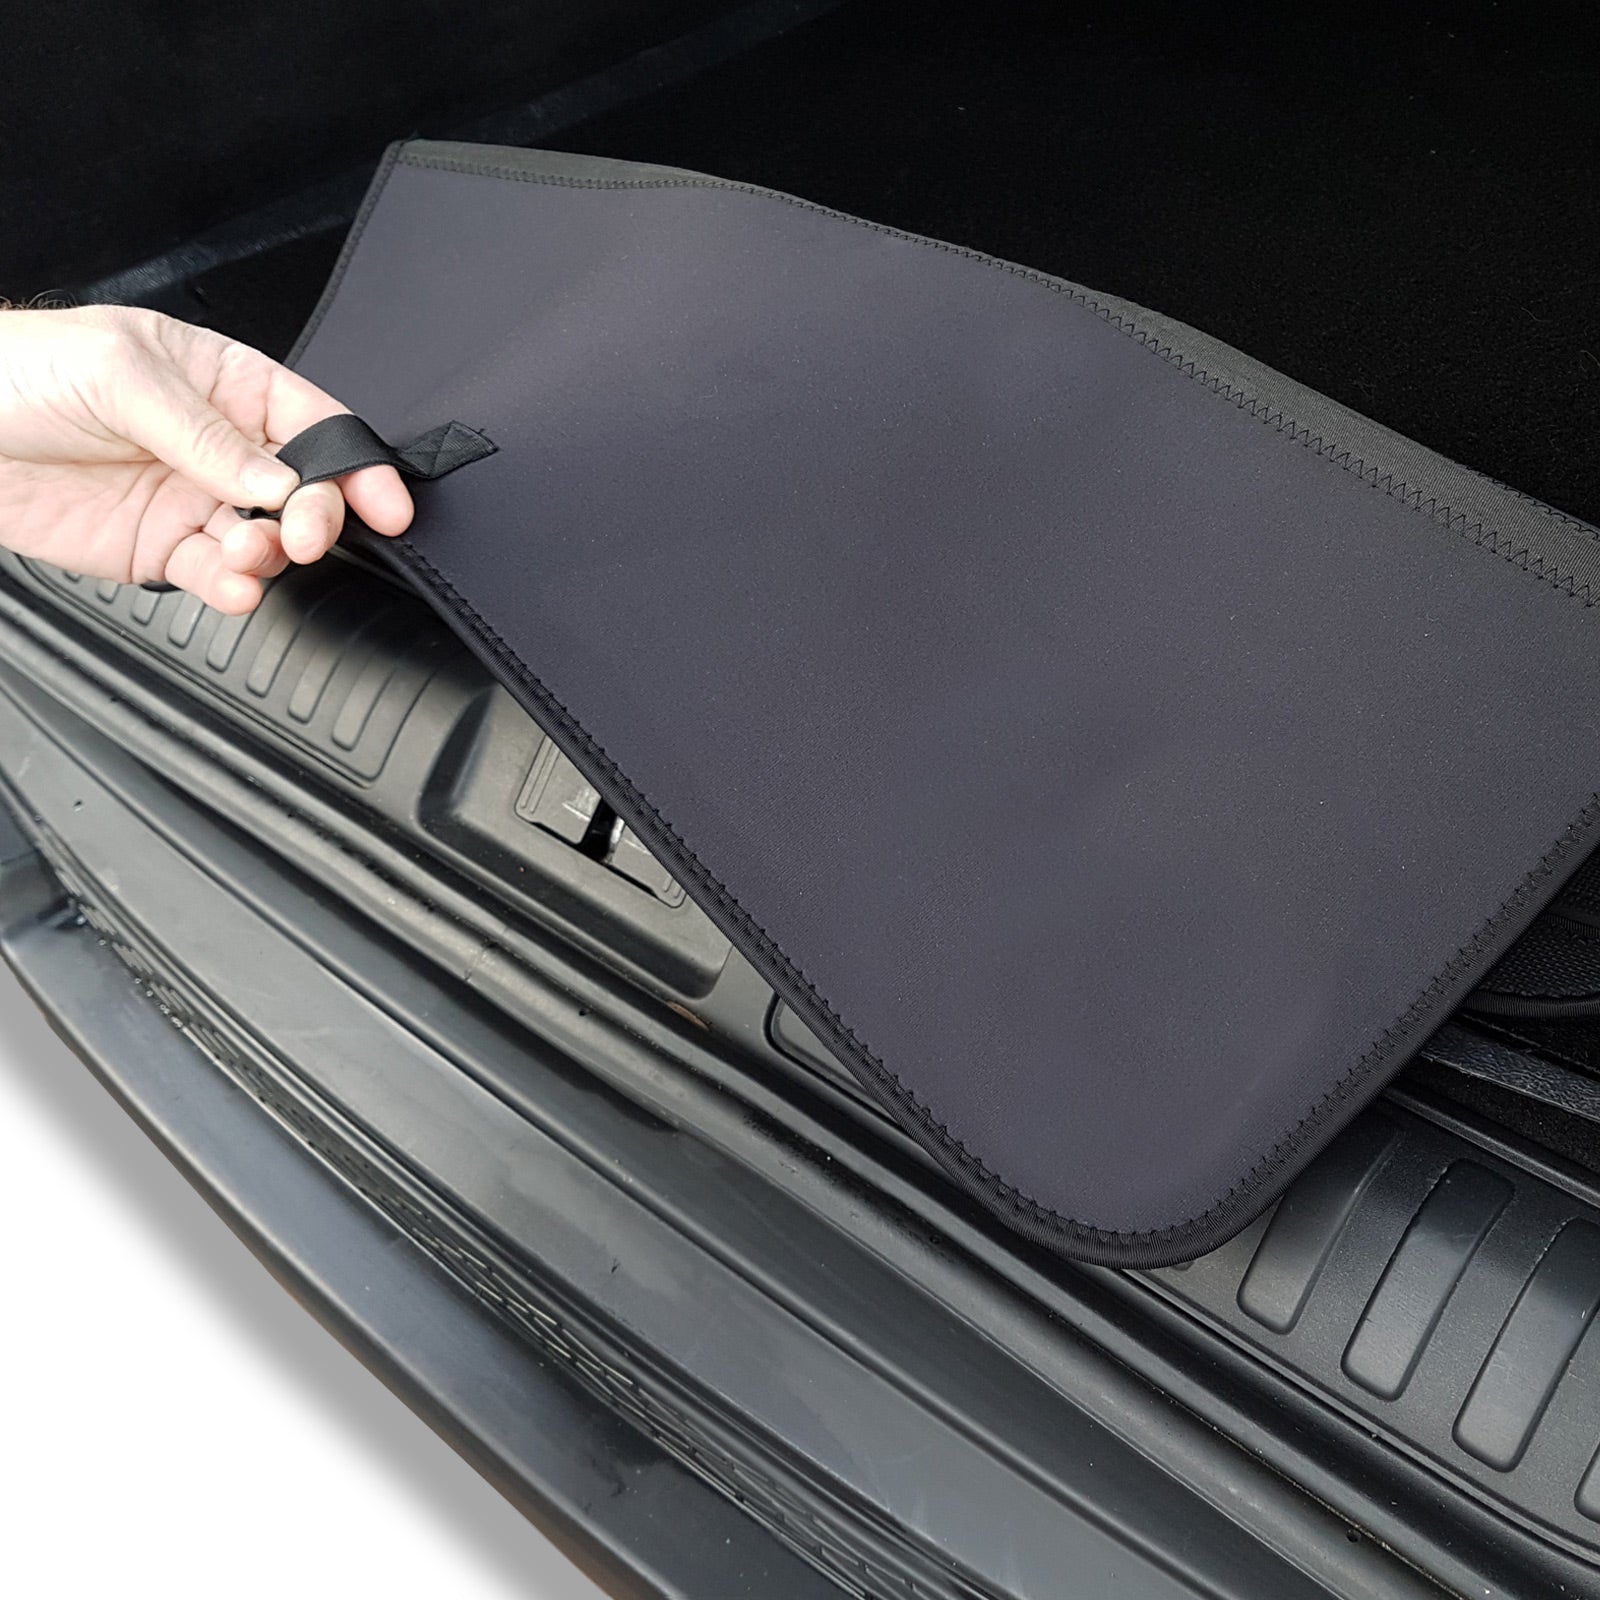 Boot Liner, Carpet Insert & Protector Kit-Toyota Auris HB 2007-2012 – Anthracite